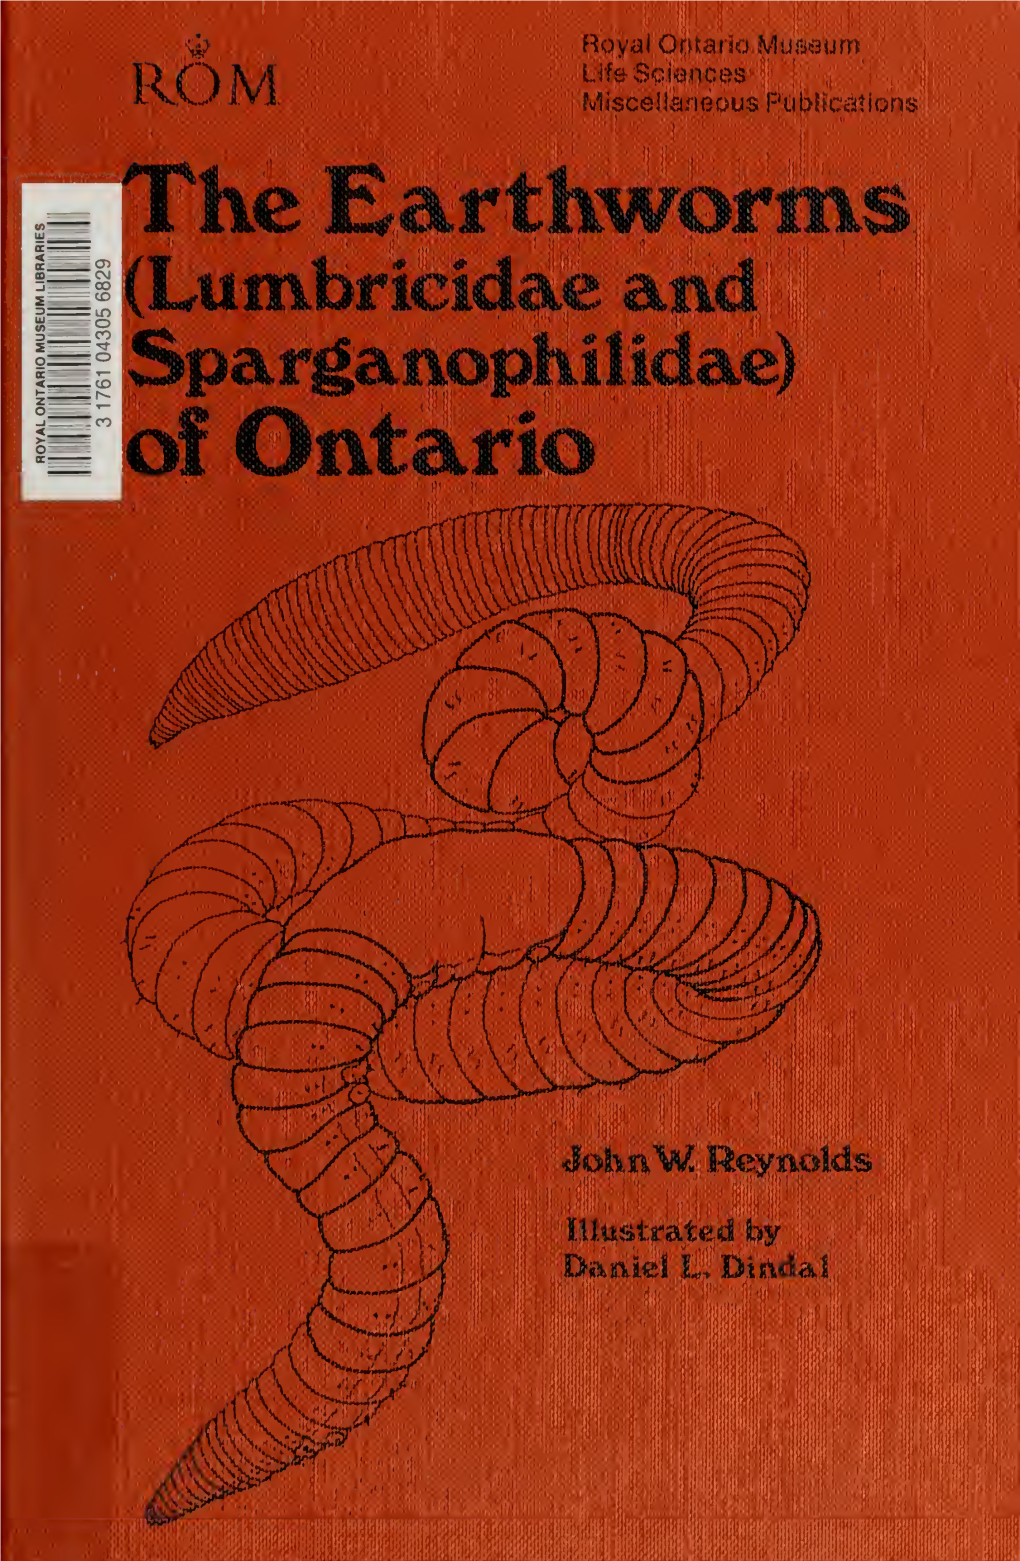 The Earthworms (Lumbricidae and Sparganophilidae) of Ontario